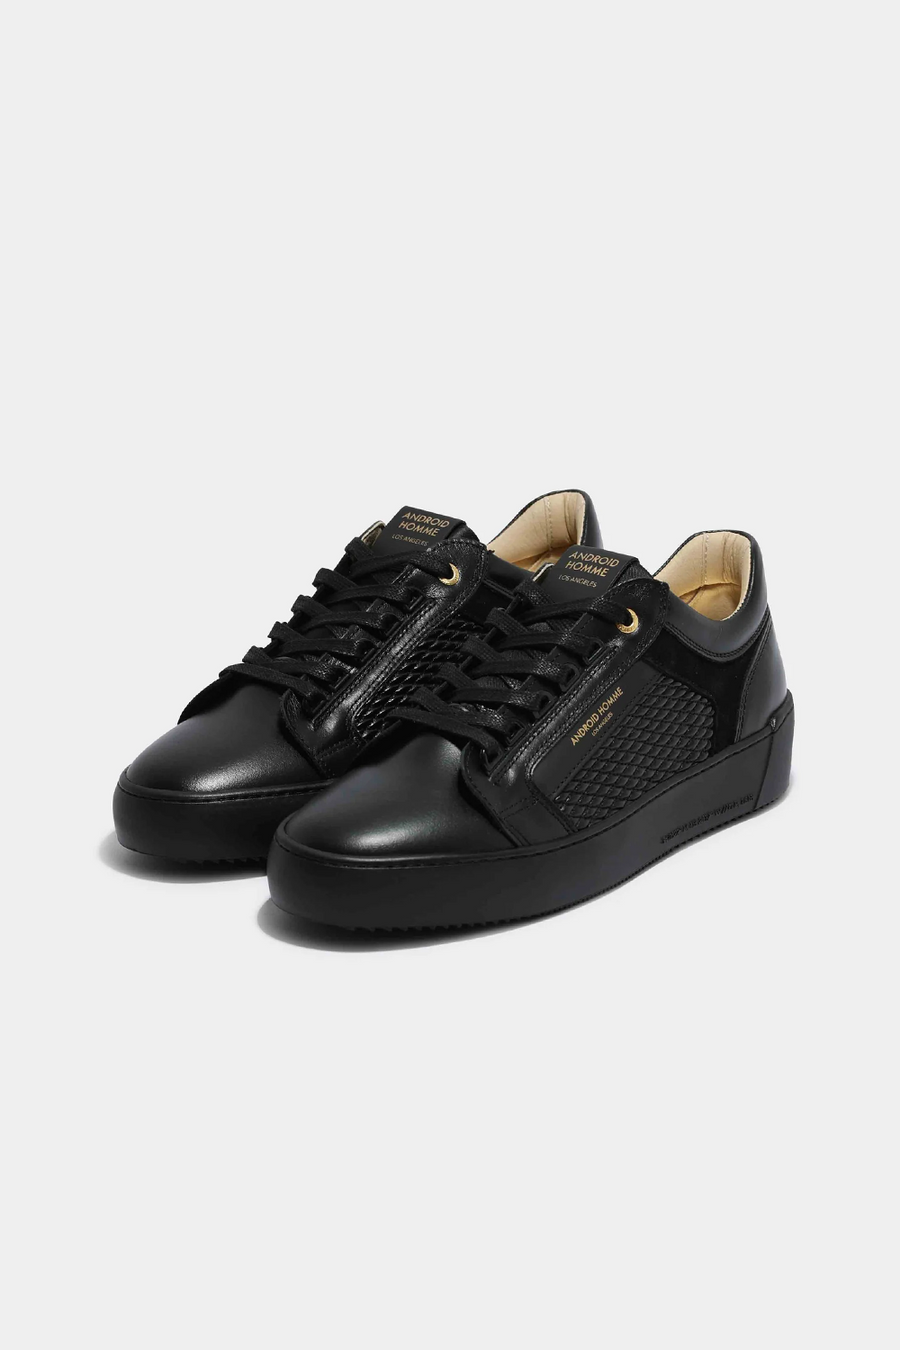 Buy the Android Homme Venice Black Stretch Woven Sneaker at Intro. Spend £100 for free UK delivery. Official stockists. We ship worldwide.